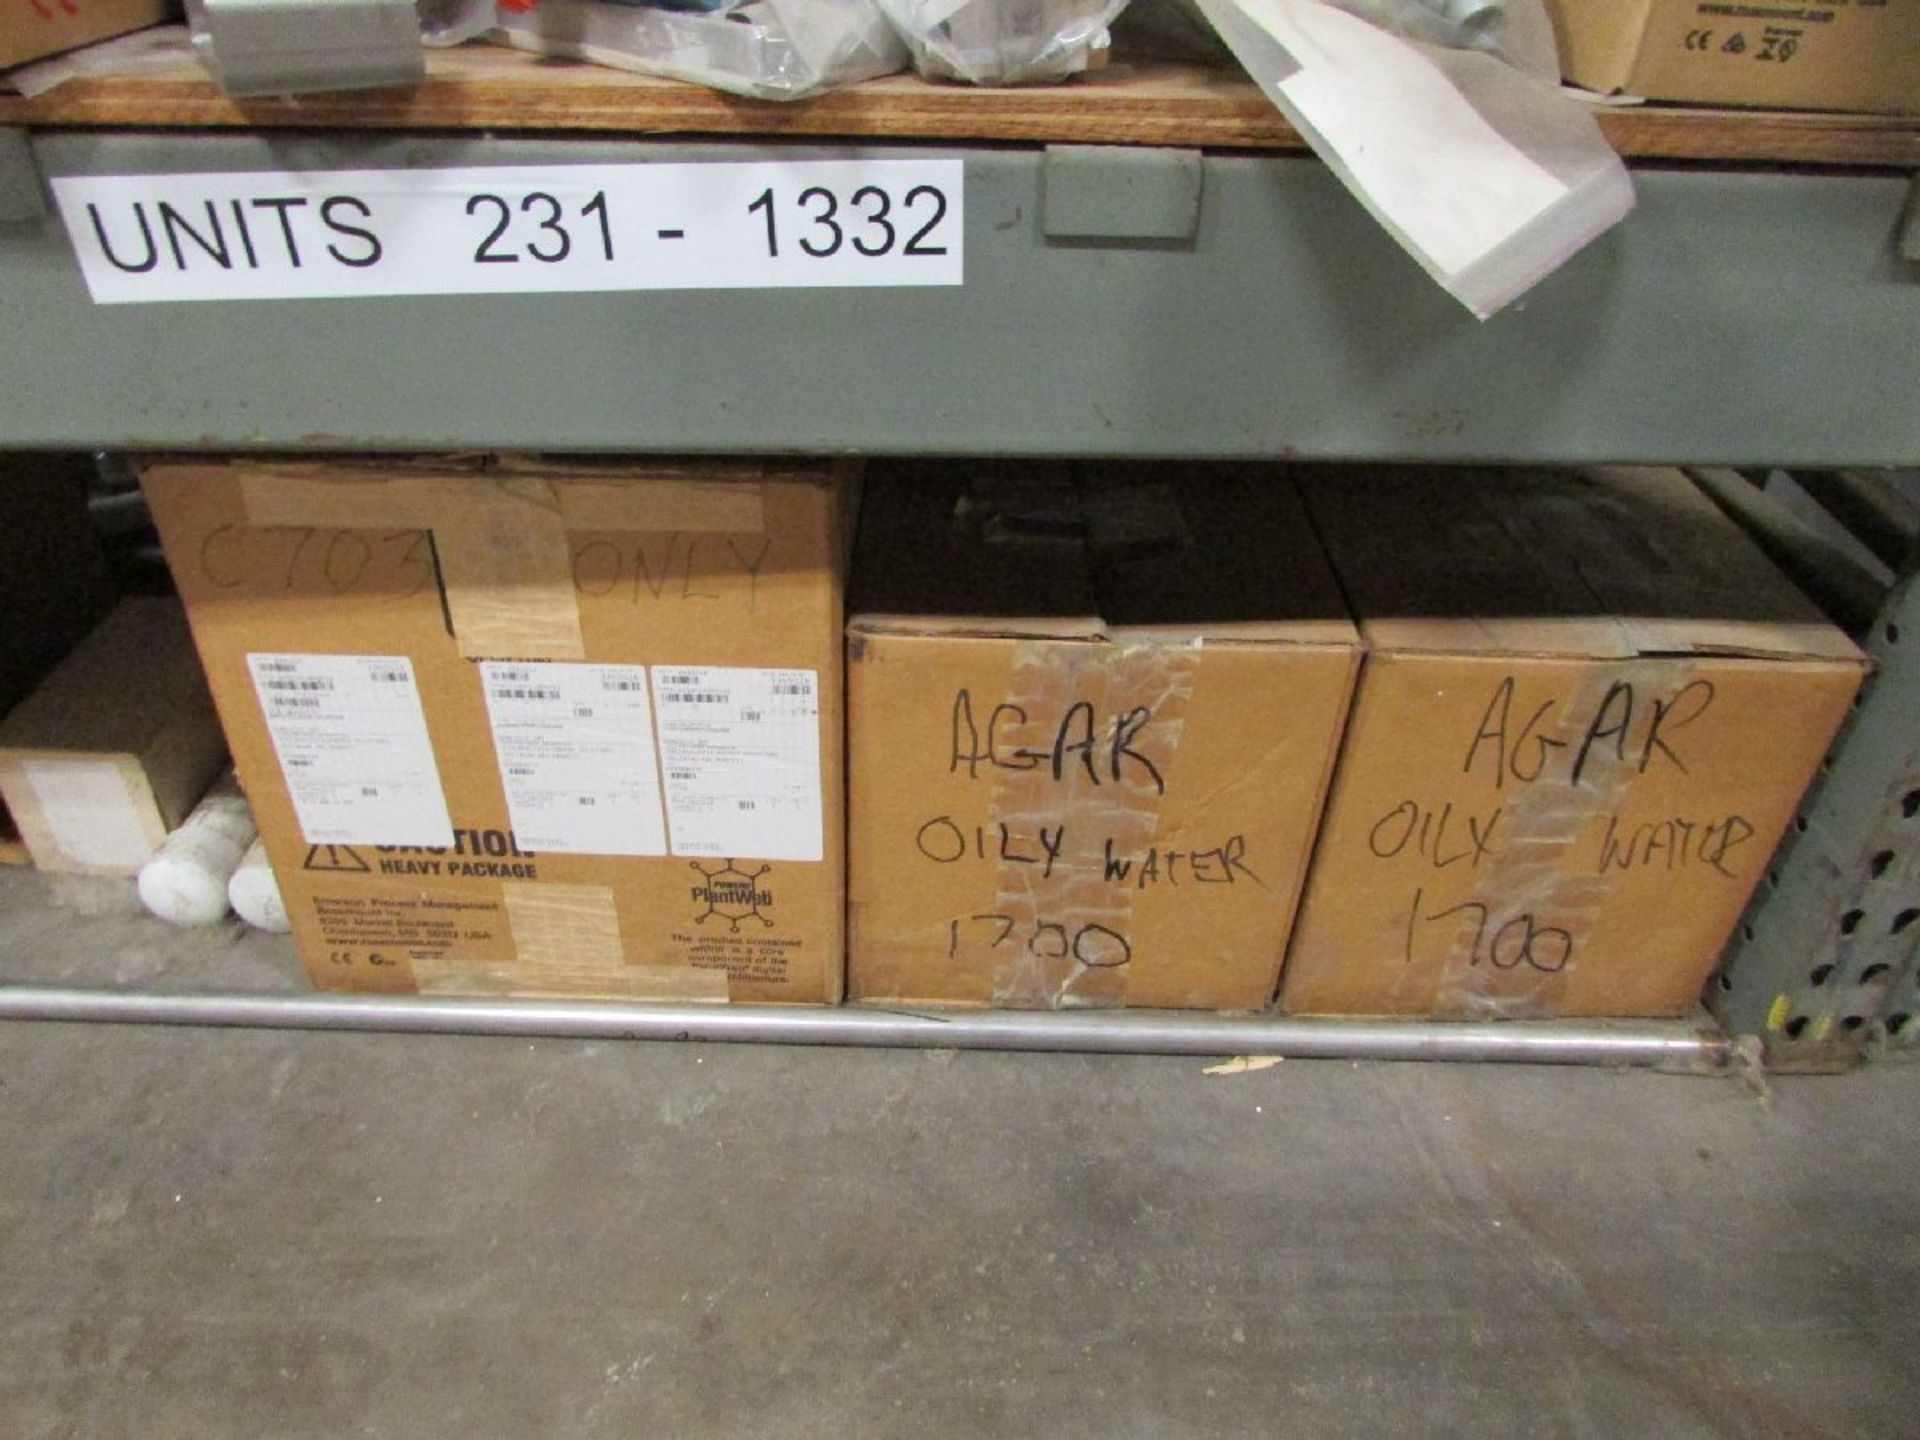 Lot of Assorted Power Supplies, Swagelok, Honeywell Displays, Valves Spare Parts - Image 12 of 12